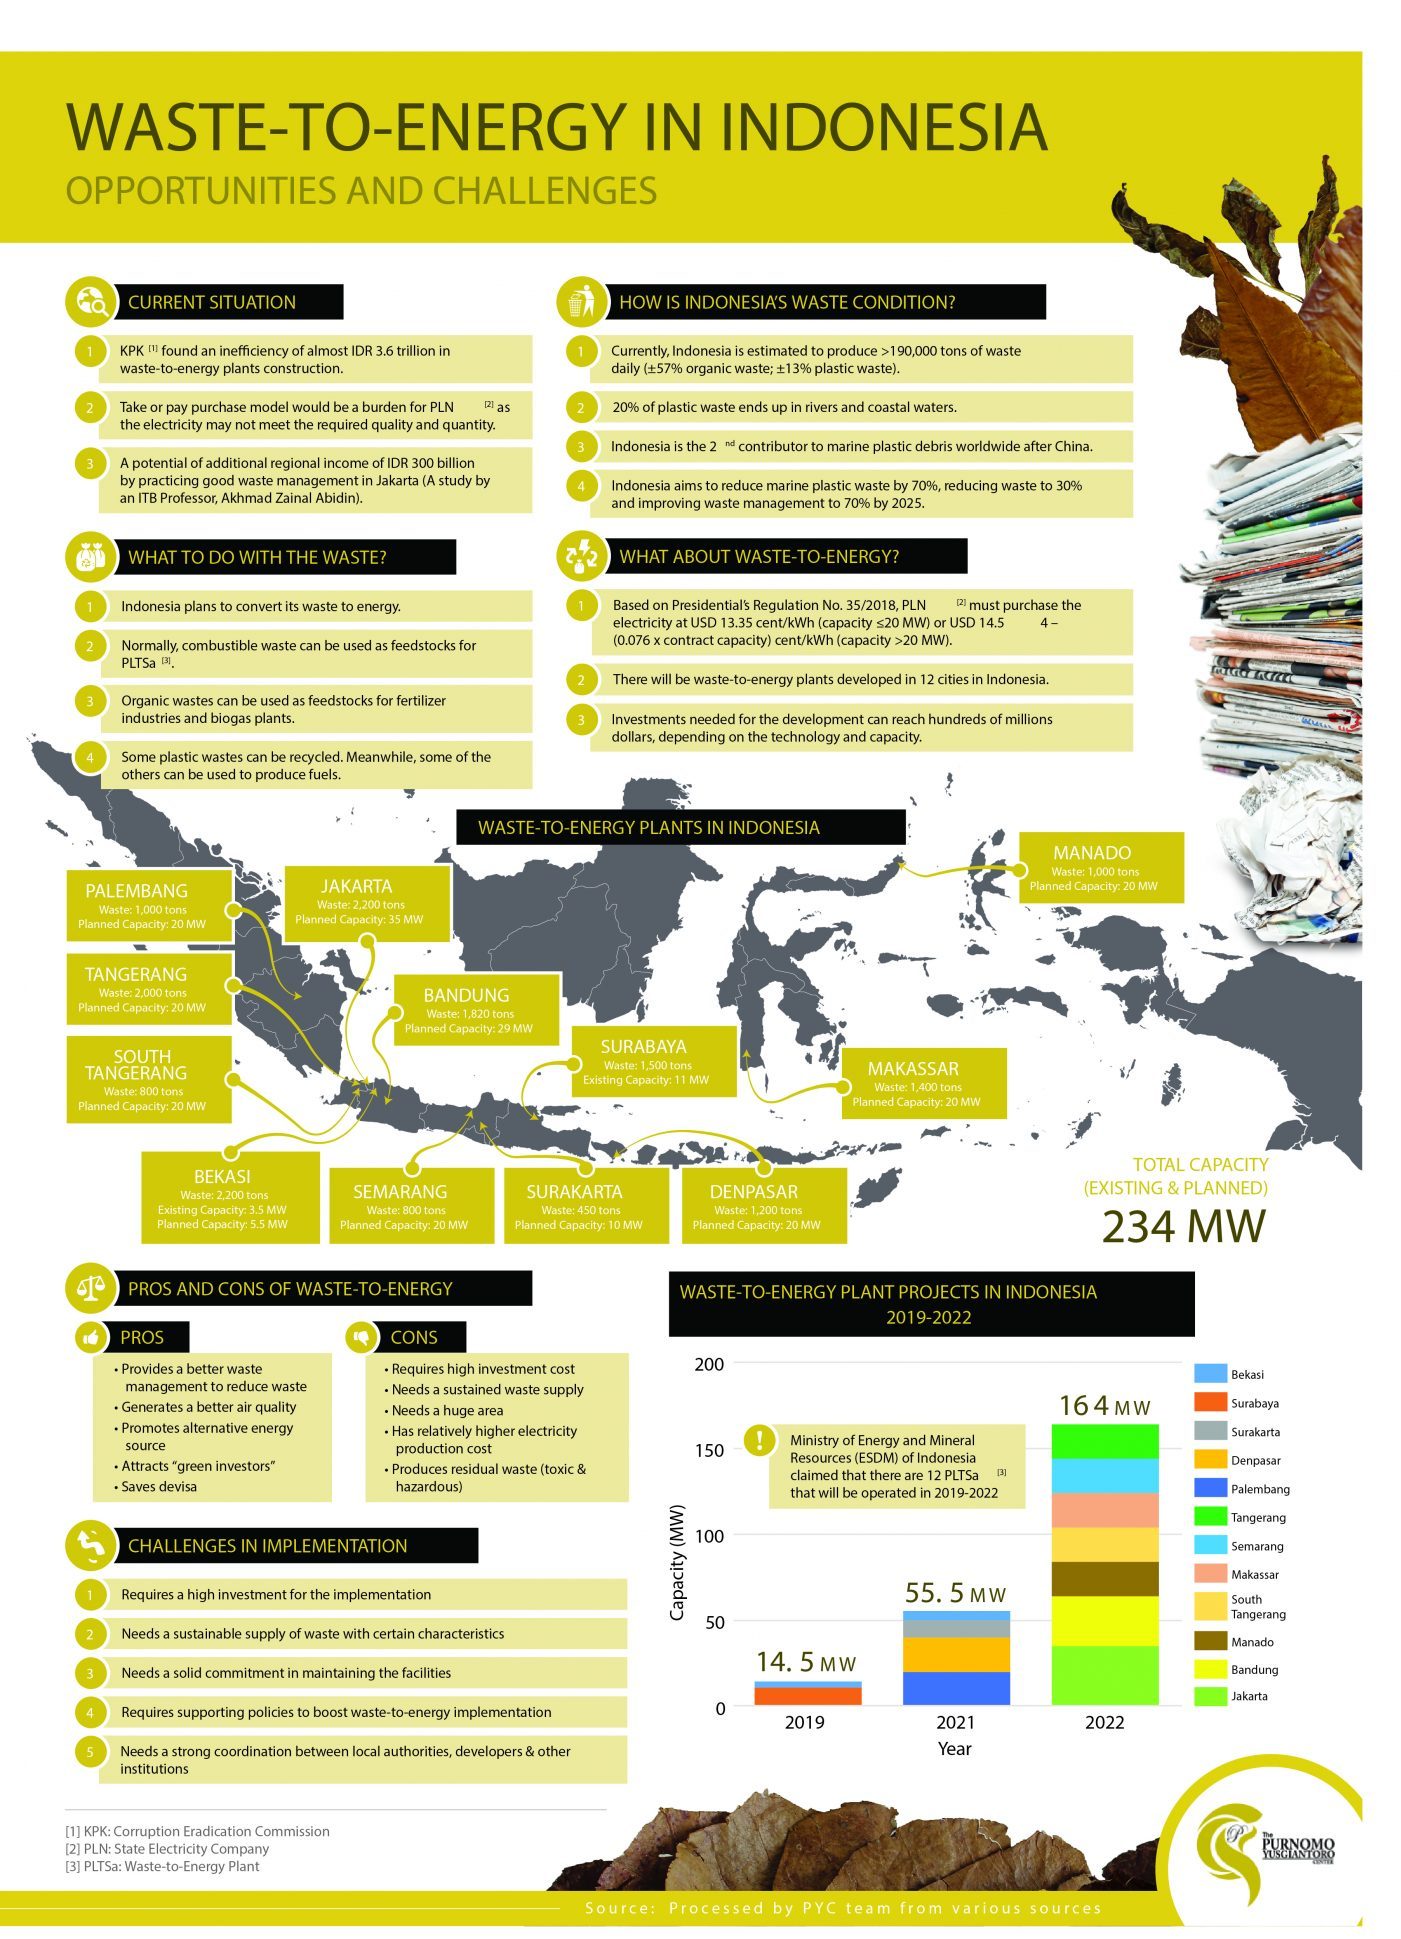 WASTE-TO-ENERGY IN INDONESIA OPPORTUNITIES AND CHALLENGES